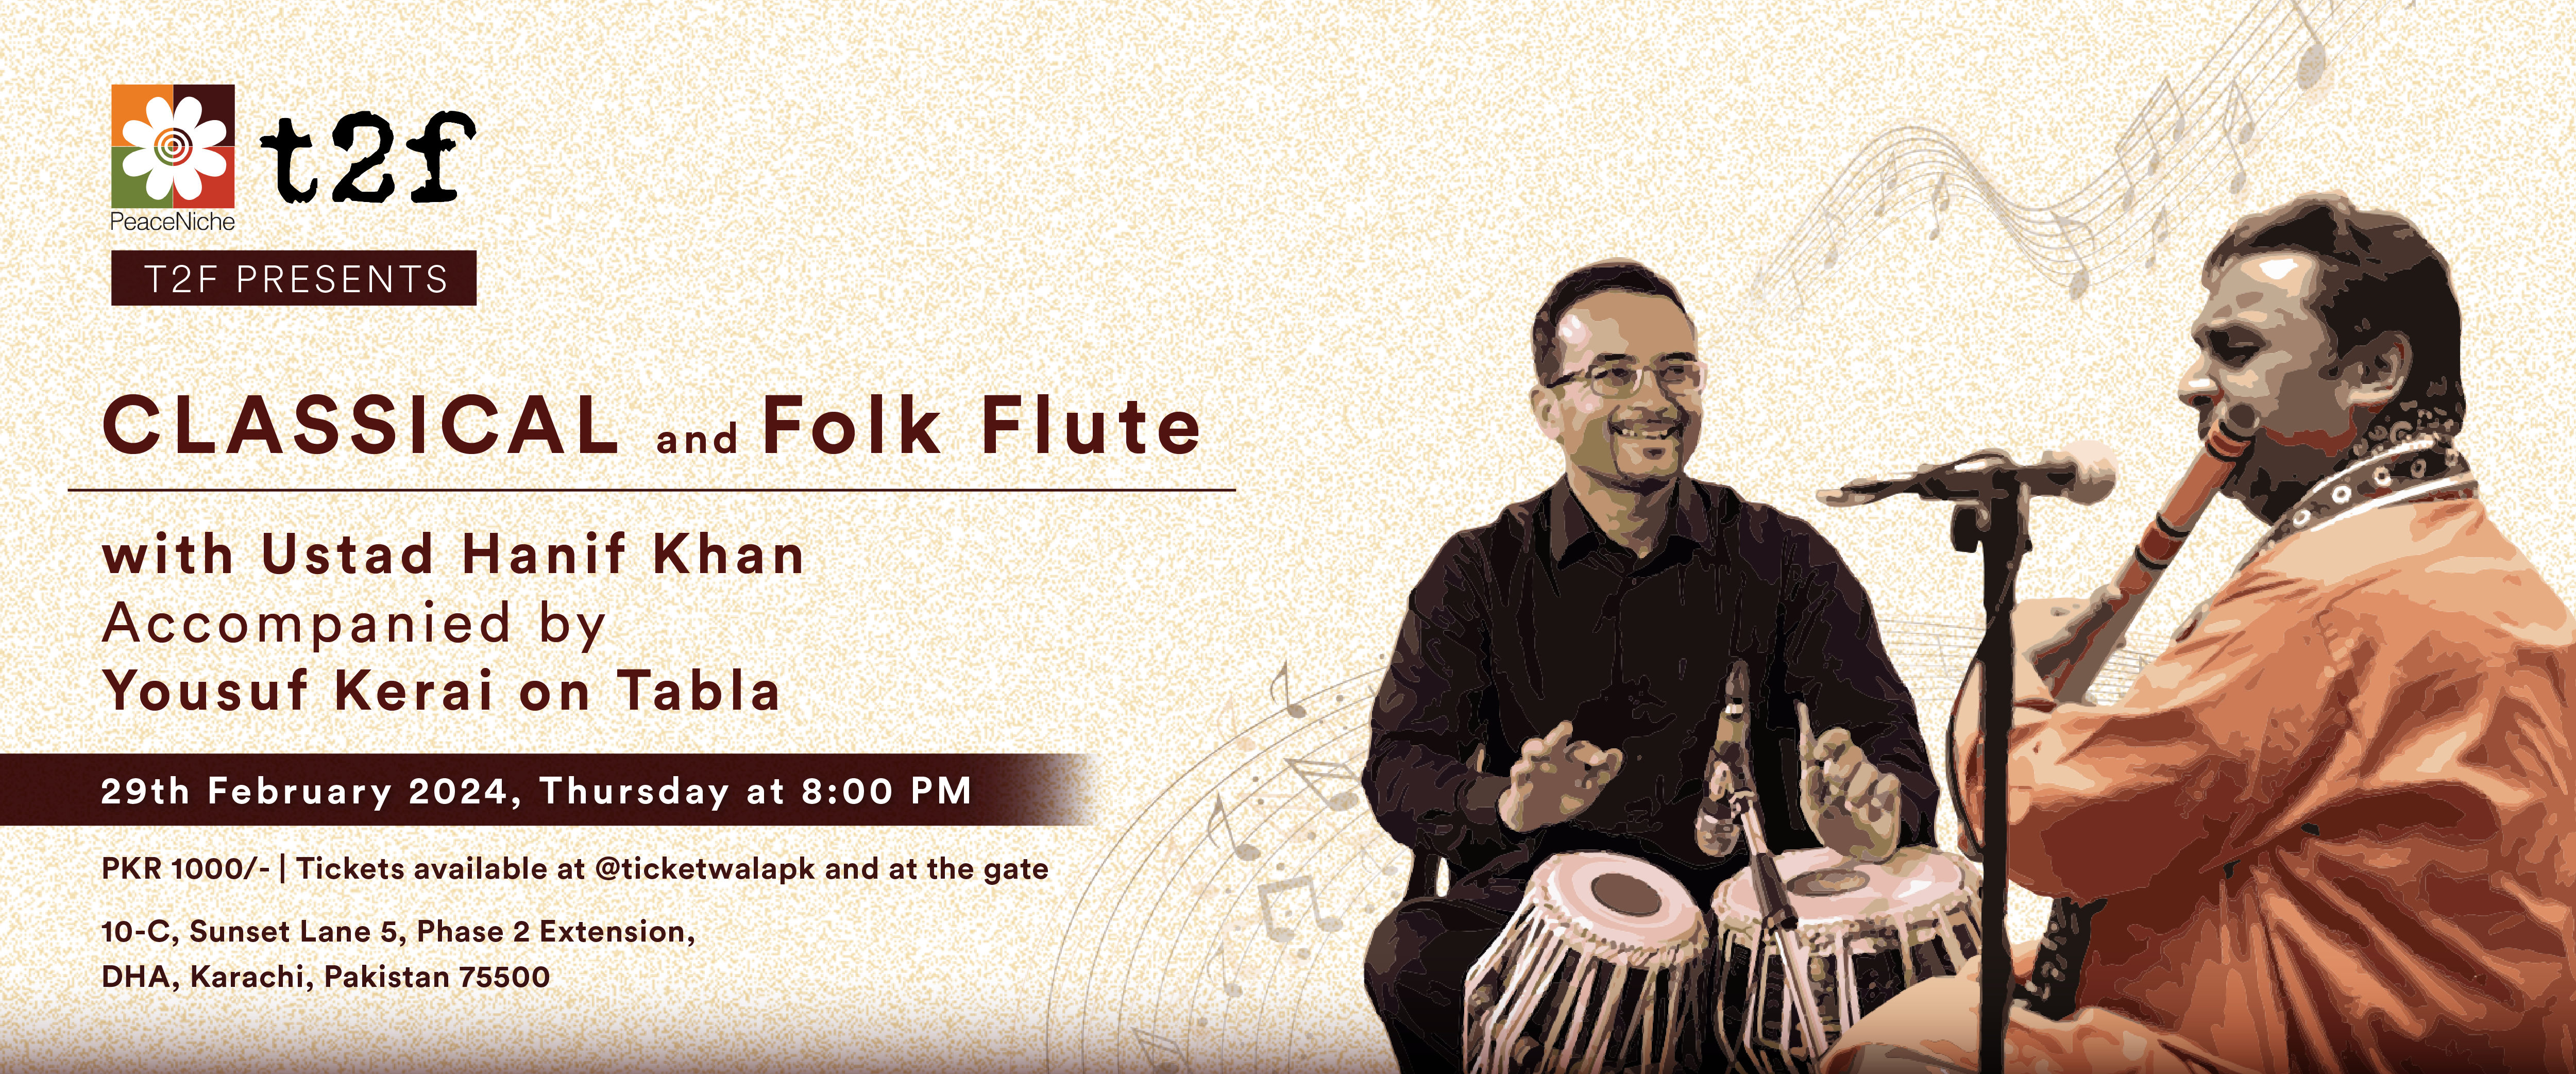 Classical and Folk Flute with Ustad Hanif Khan